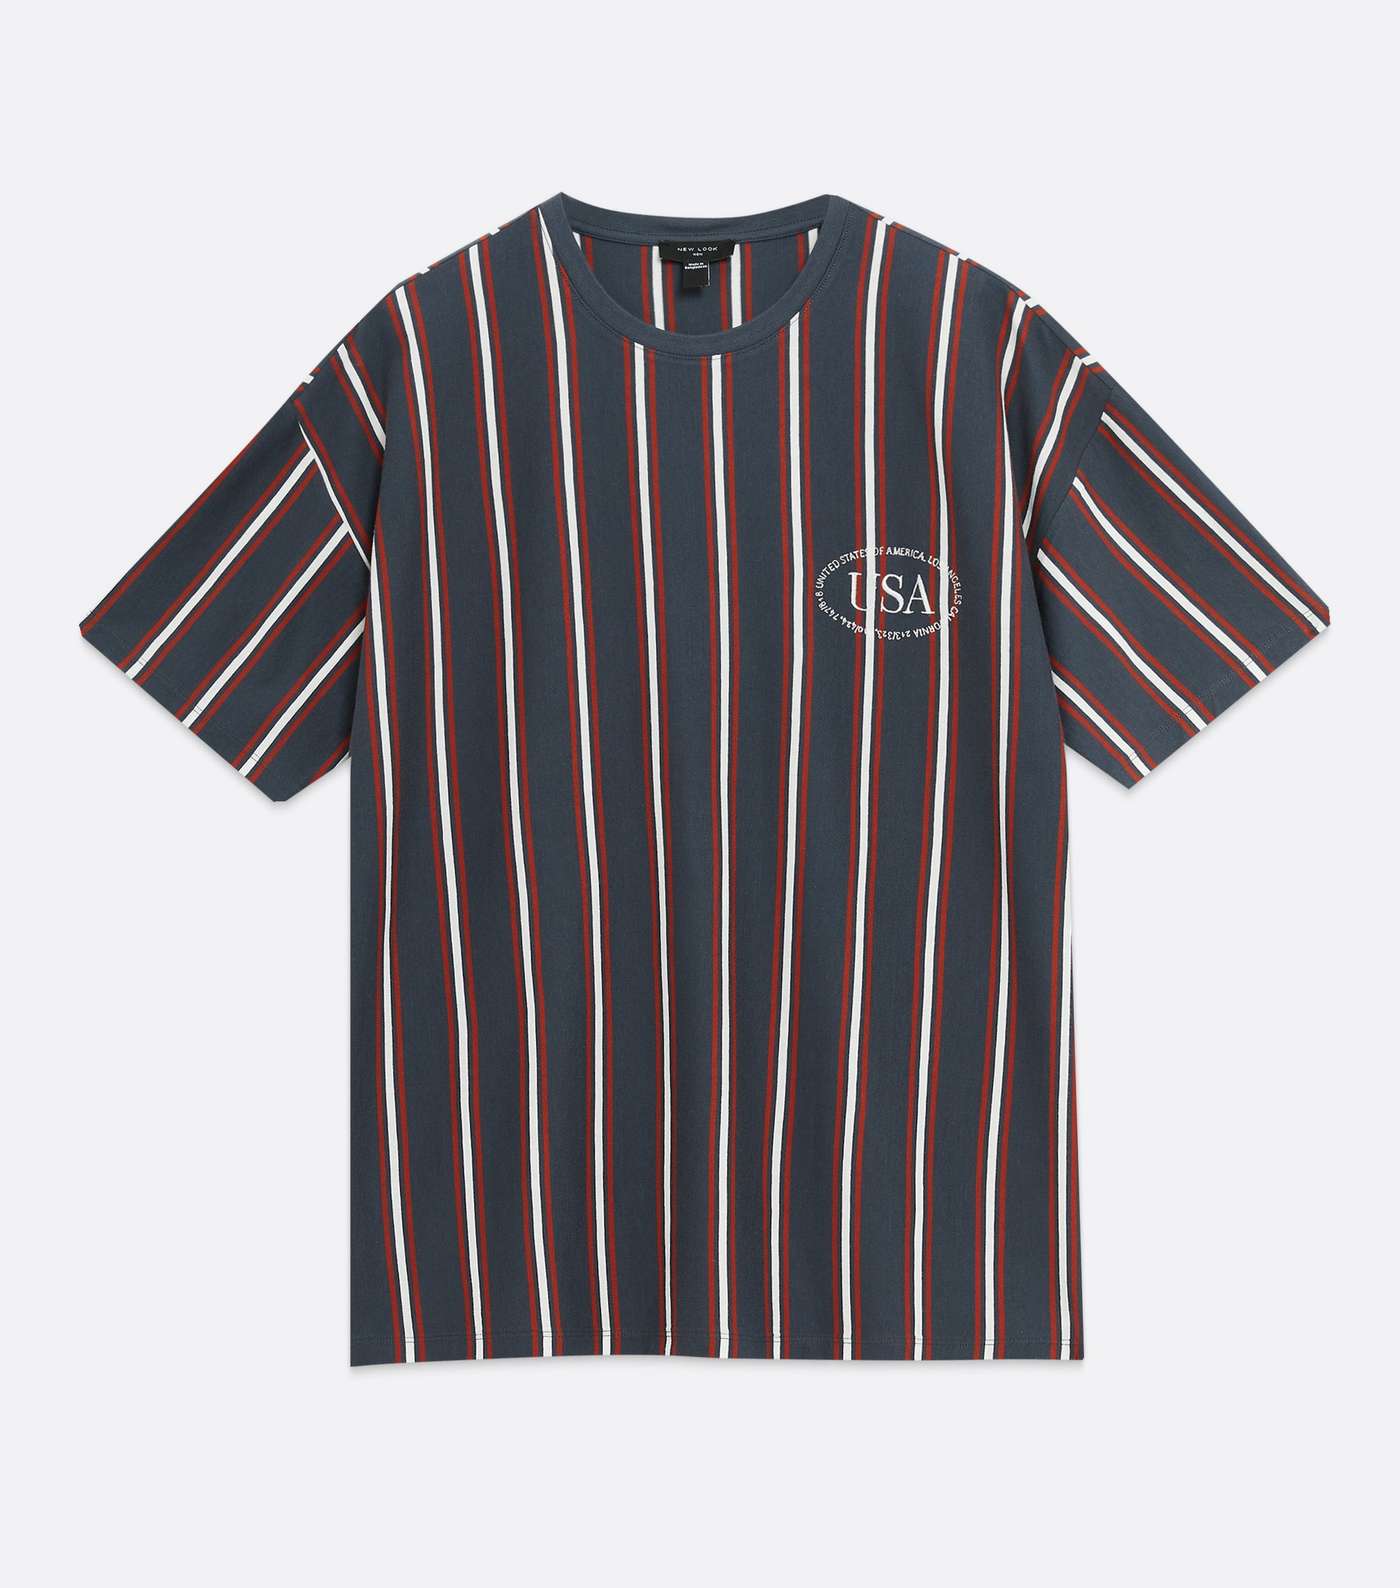 Navy Stripe USA Embroidered T-Shirt Image 5